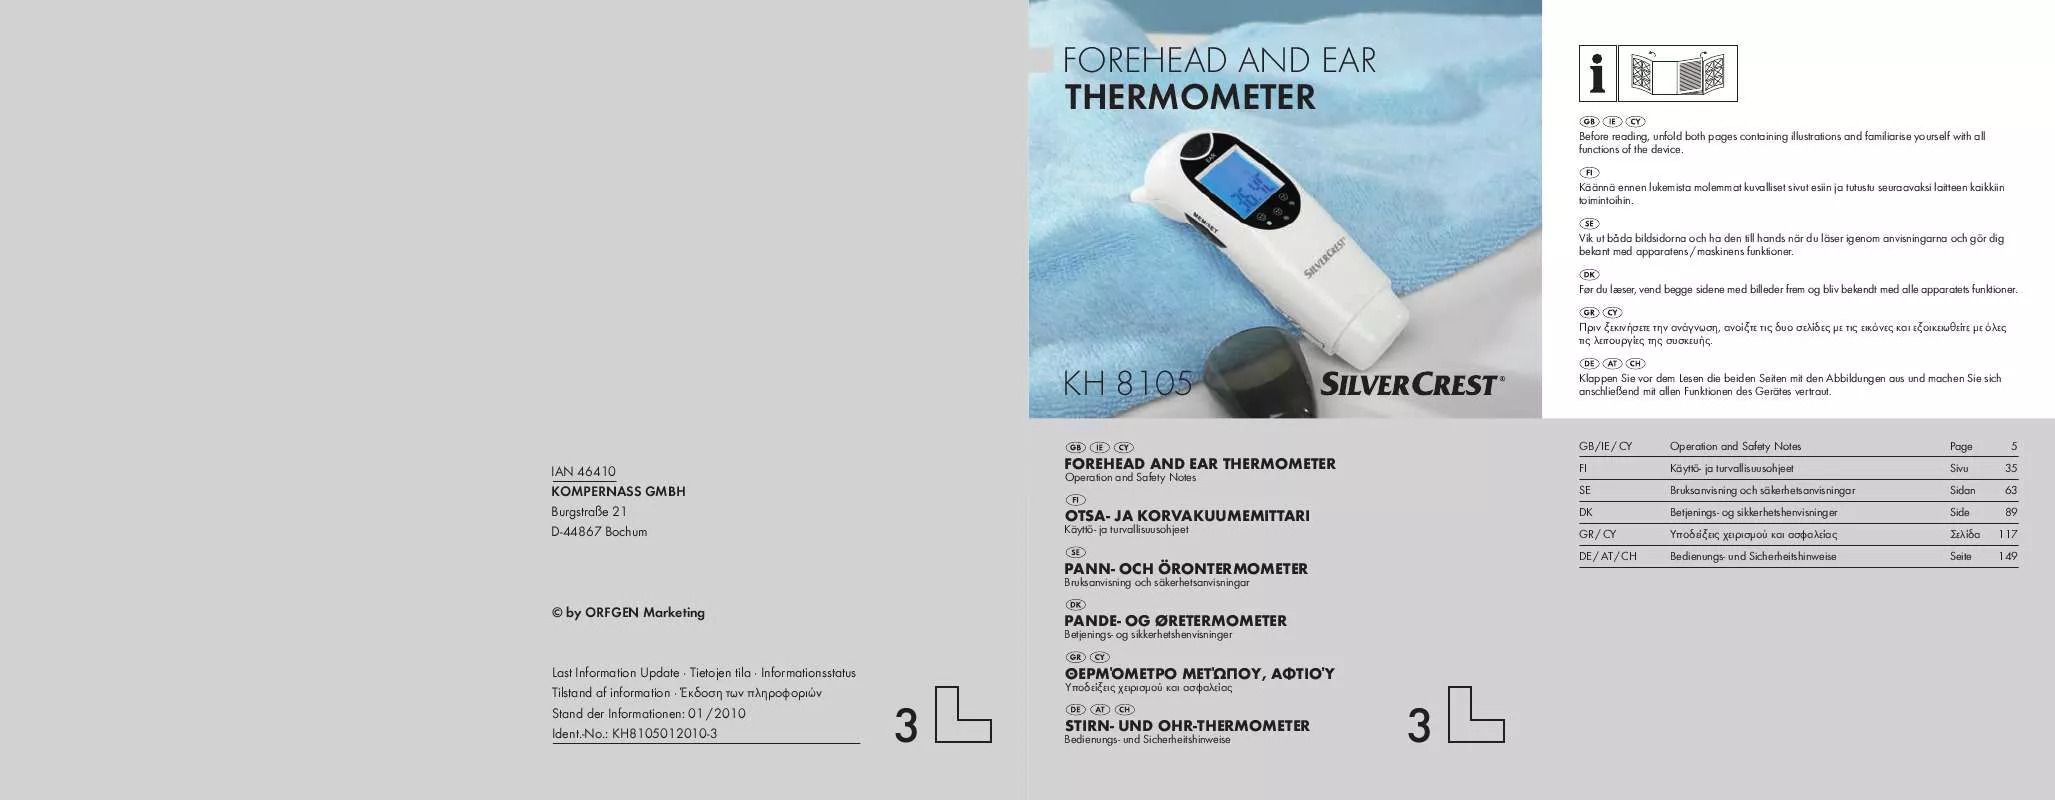 Mode d'emploi SILVERCREST KH 8105 FOREHEAD AND EAR THERMOMETER